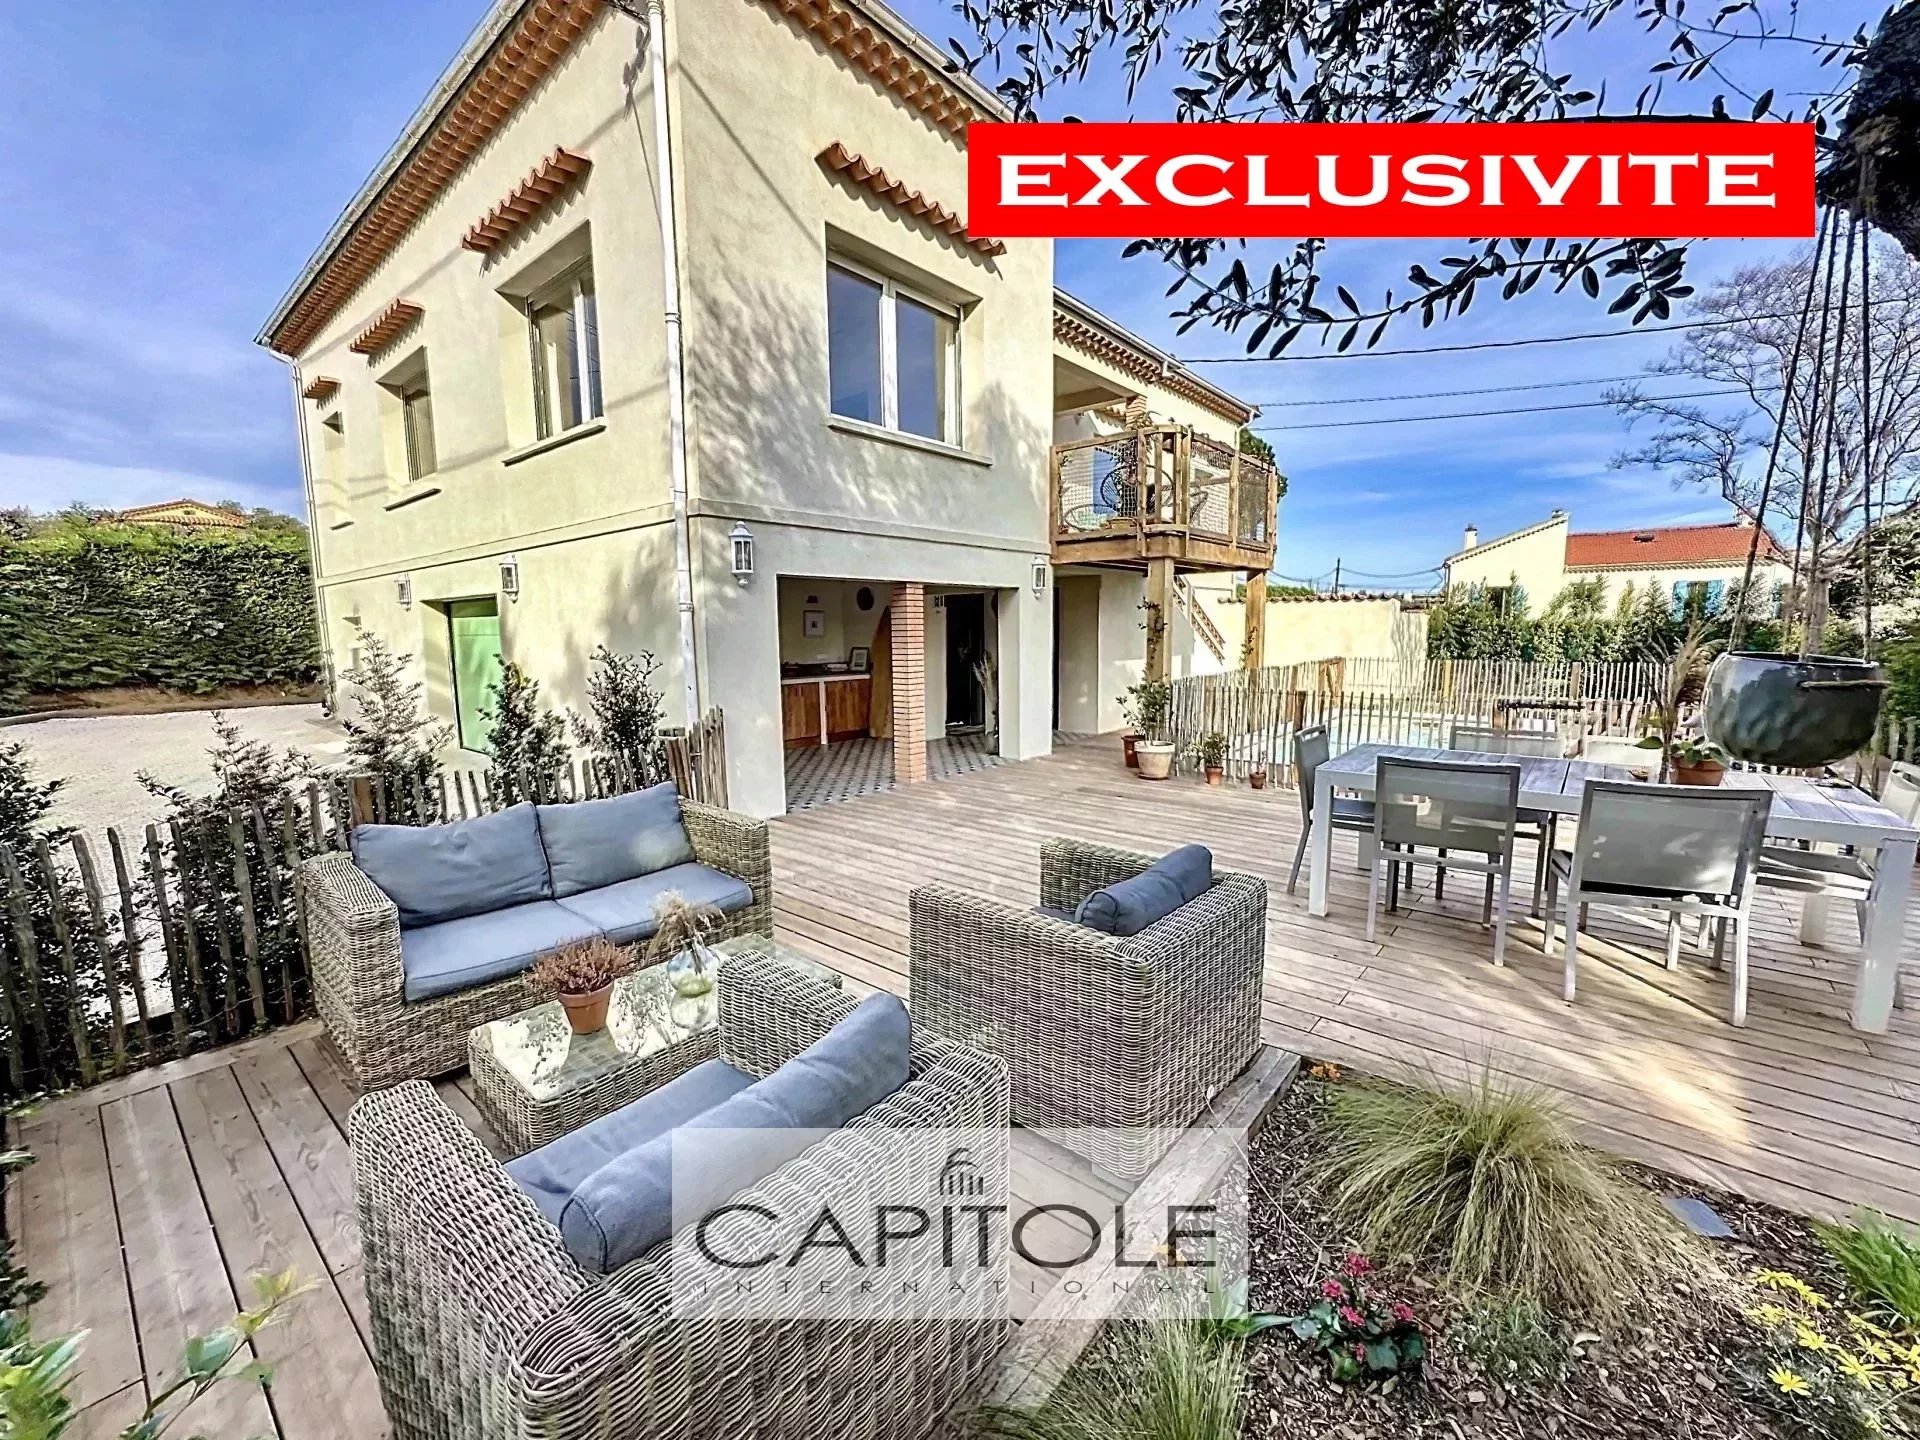 Sole agent property - Antibes, Villa  of 135 sqm, quiet and residential area